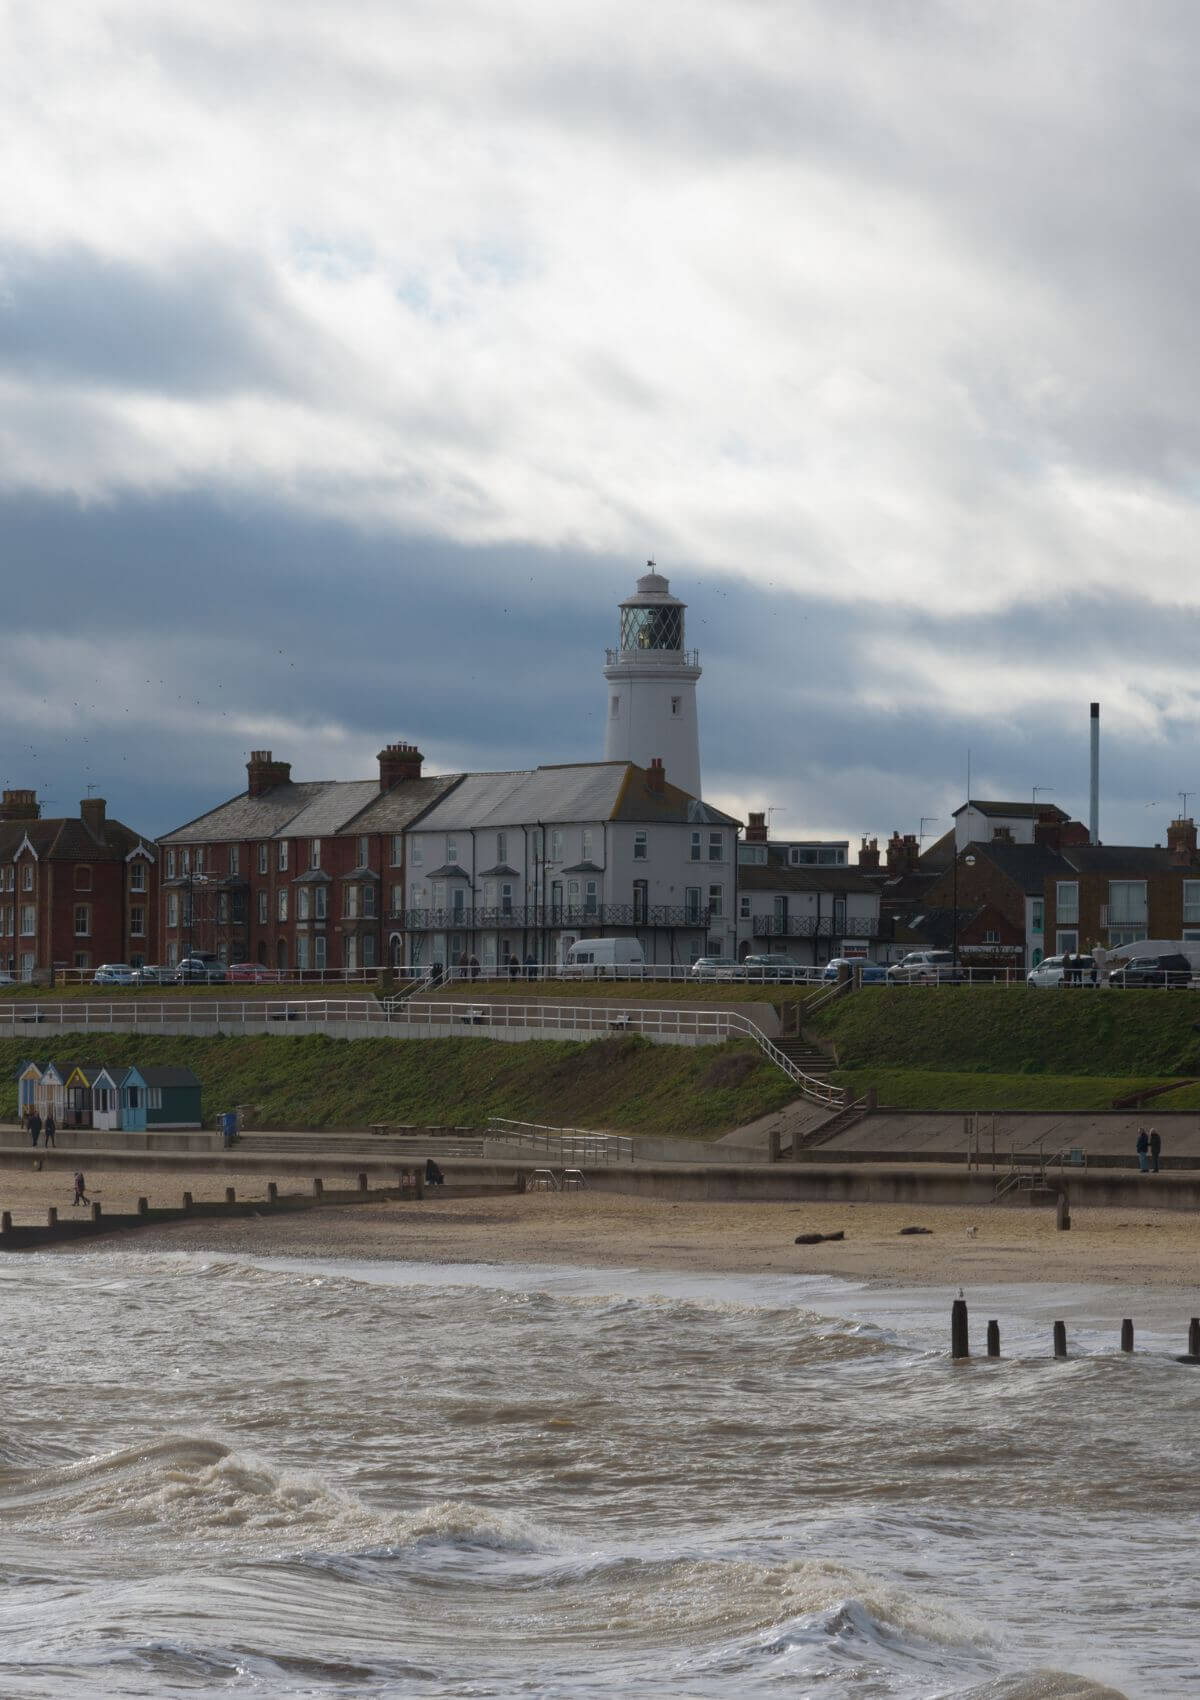 The town and beach of Southwold